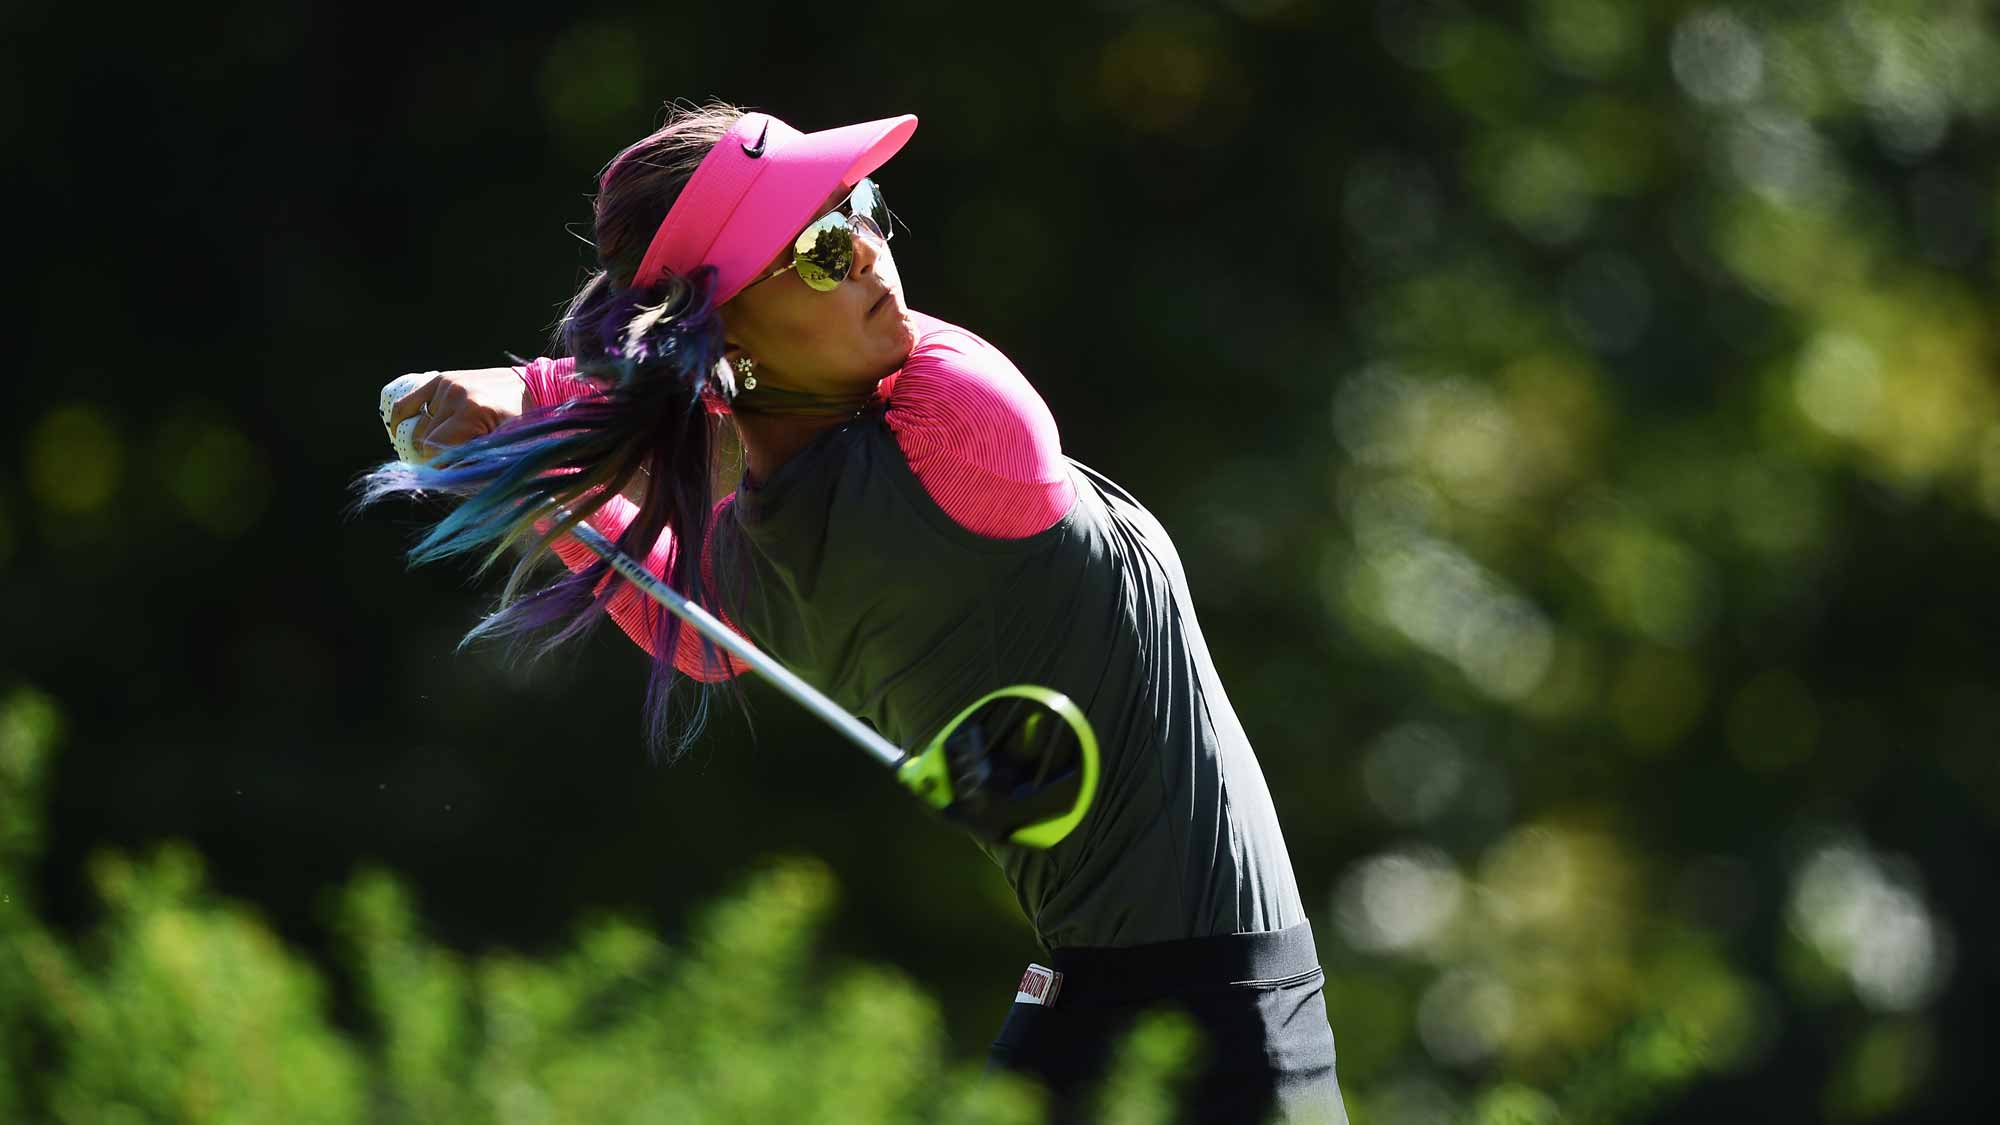 Michelle Wie during the third round of the Evian Championship